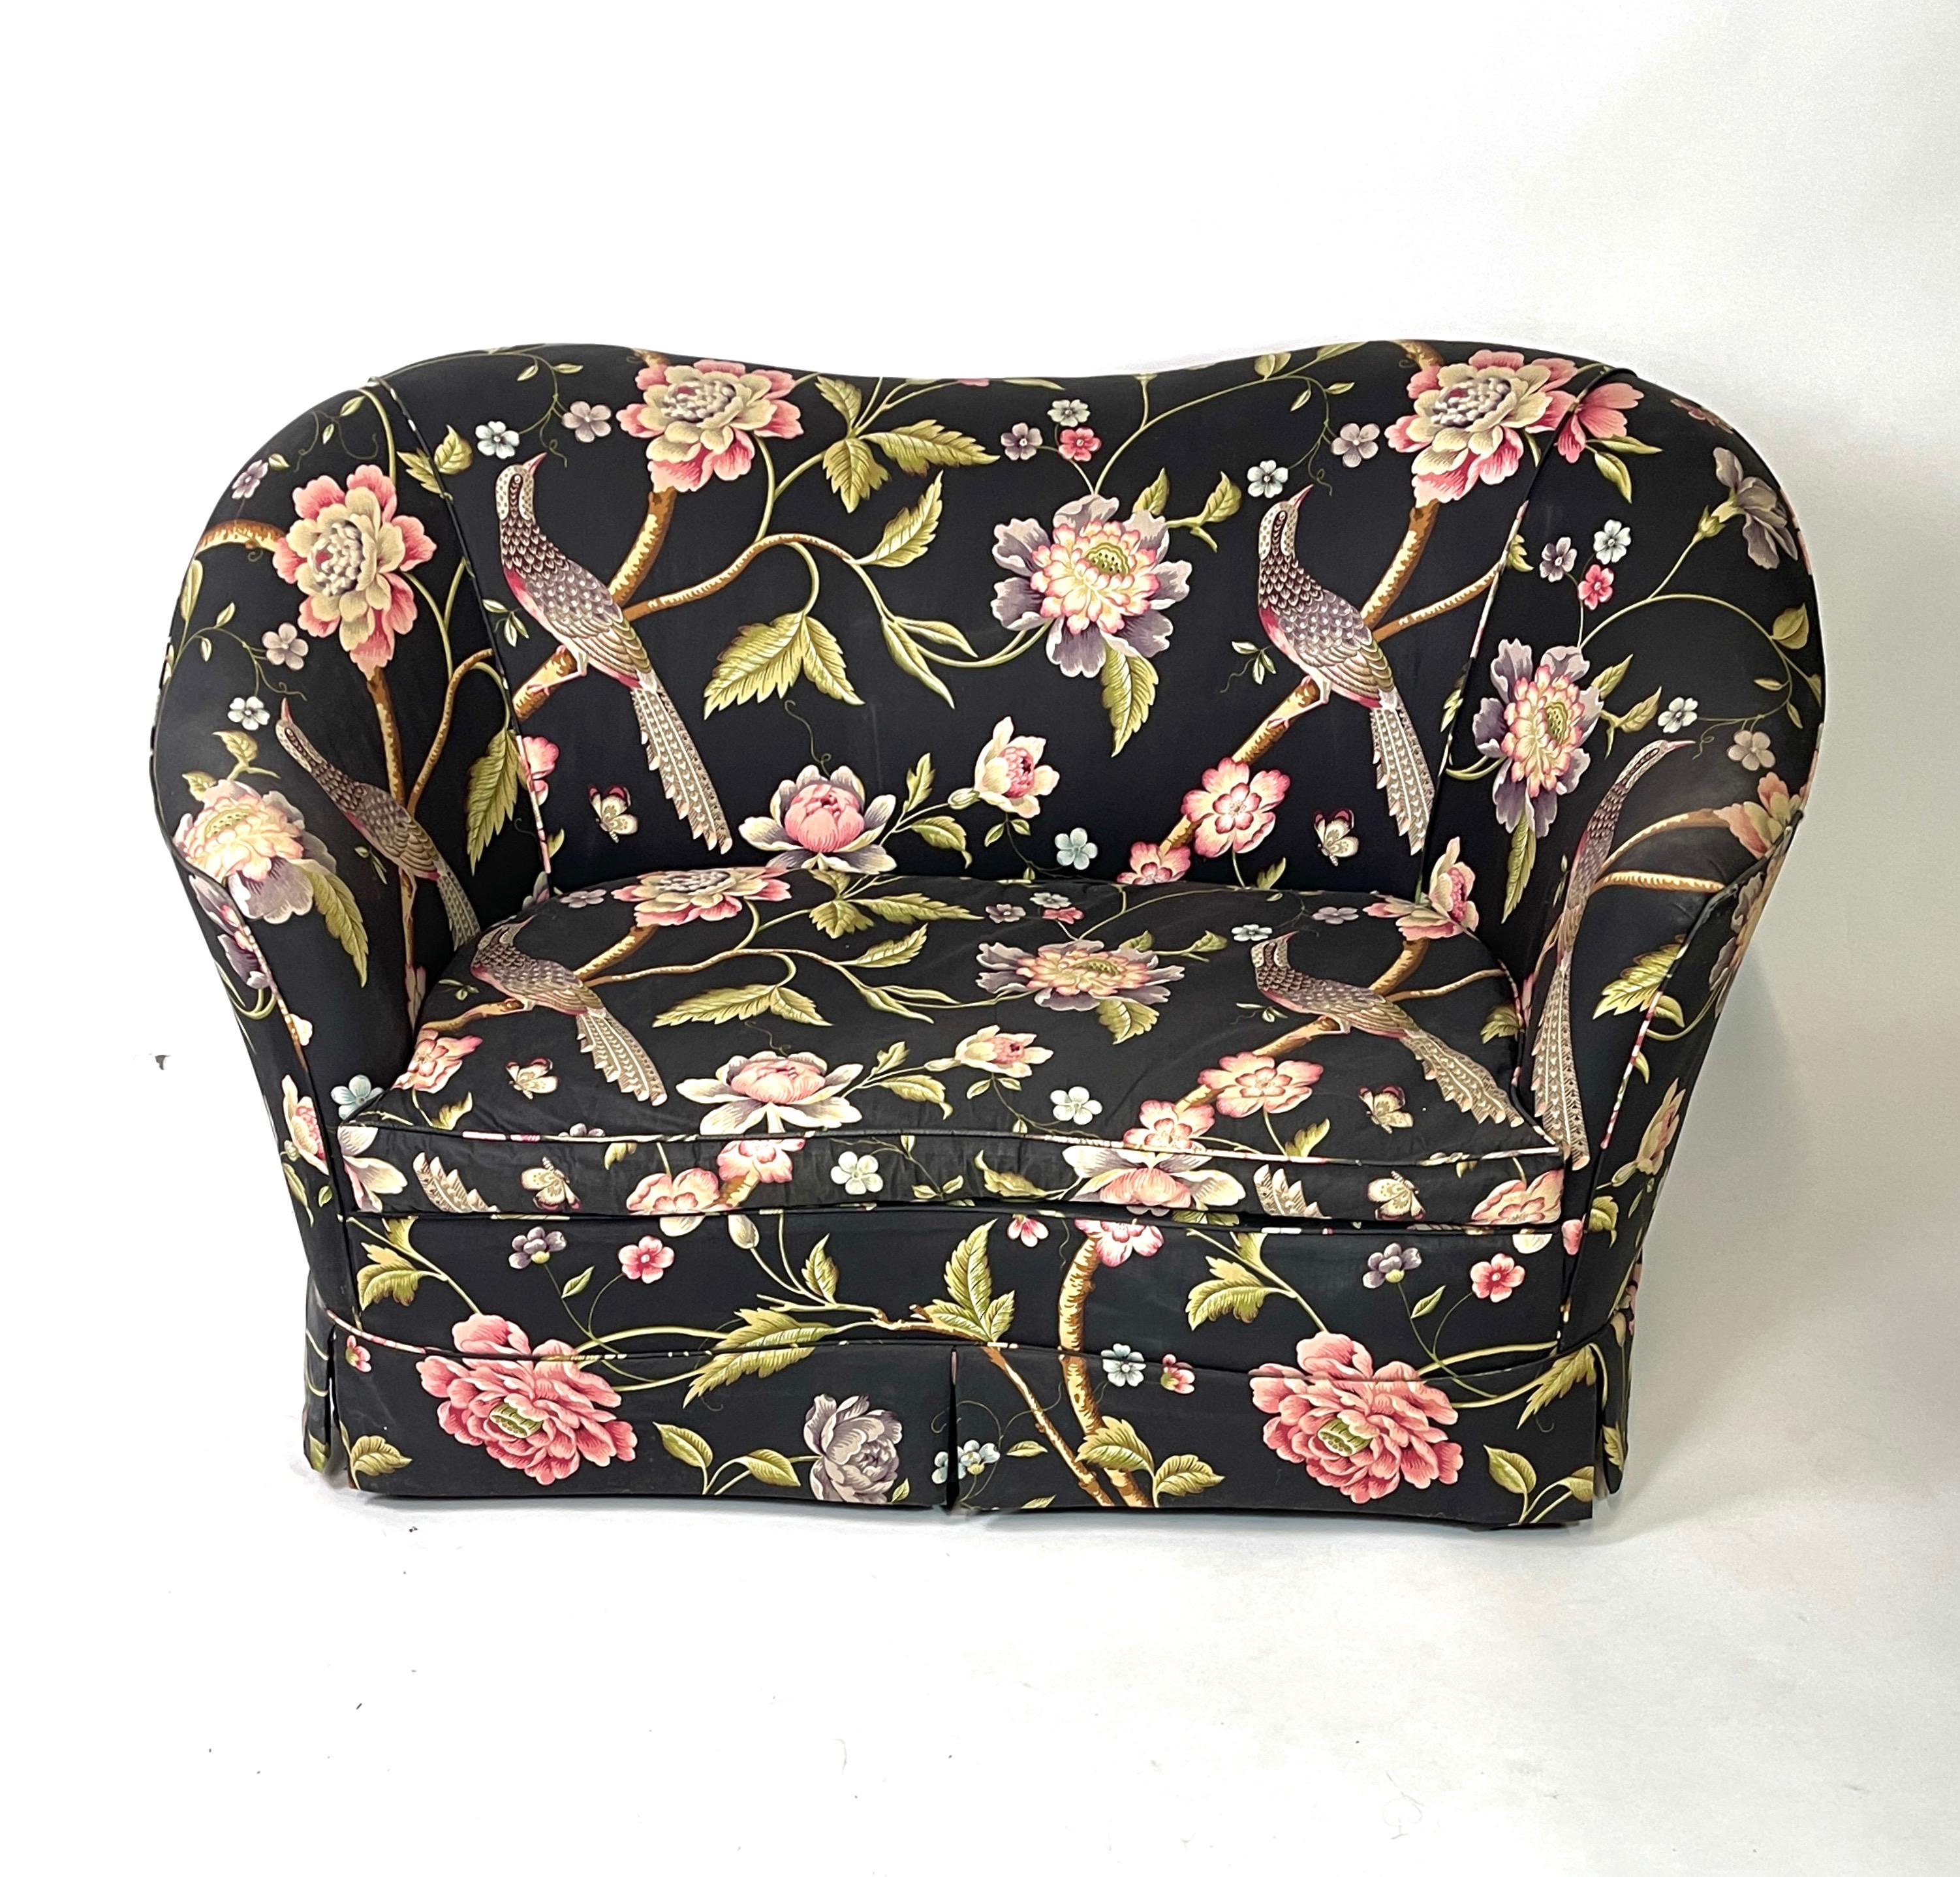 American Pair of Sculptural Curved Settees Loveseats w Whimsical Floral Chintz with Birds